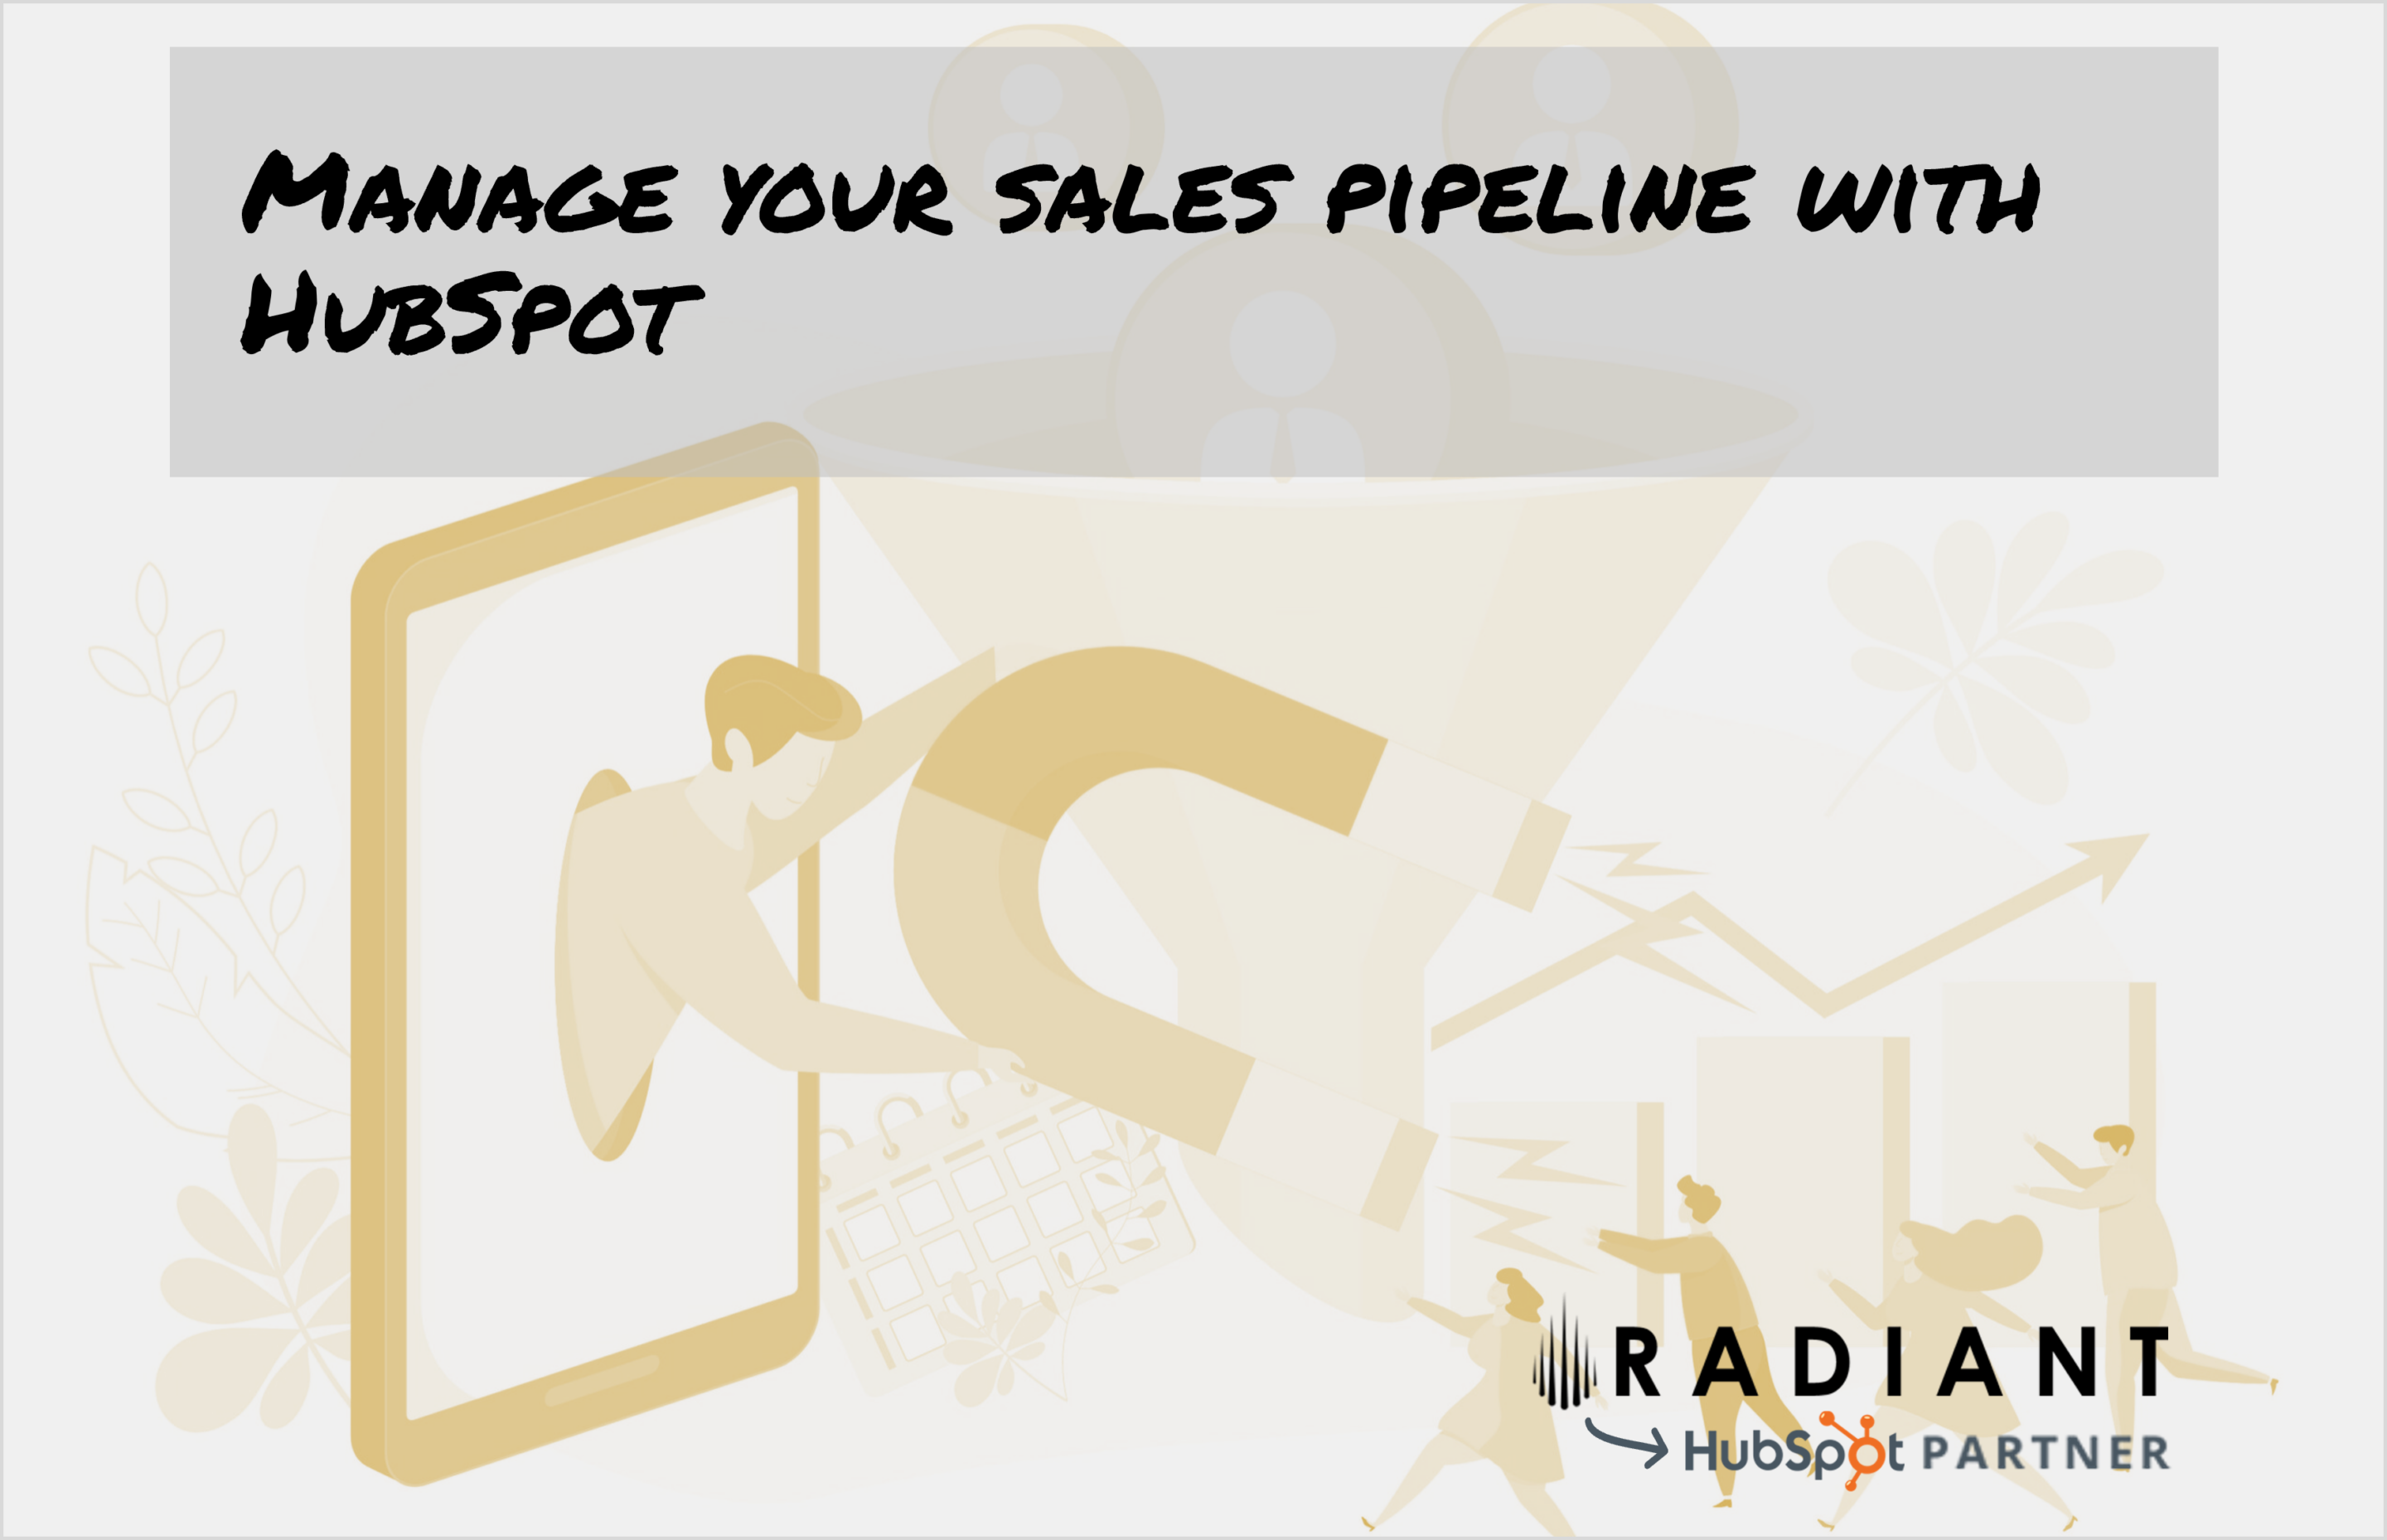 Manage your sales pipeline with HubSpot